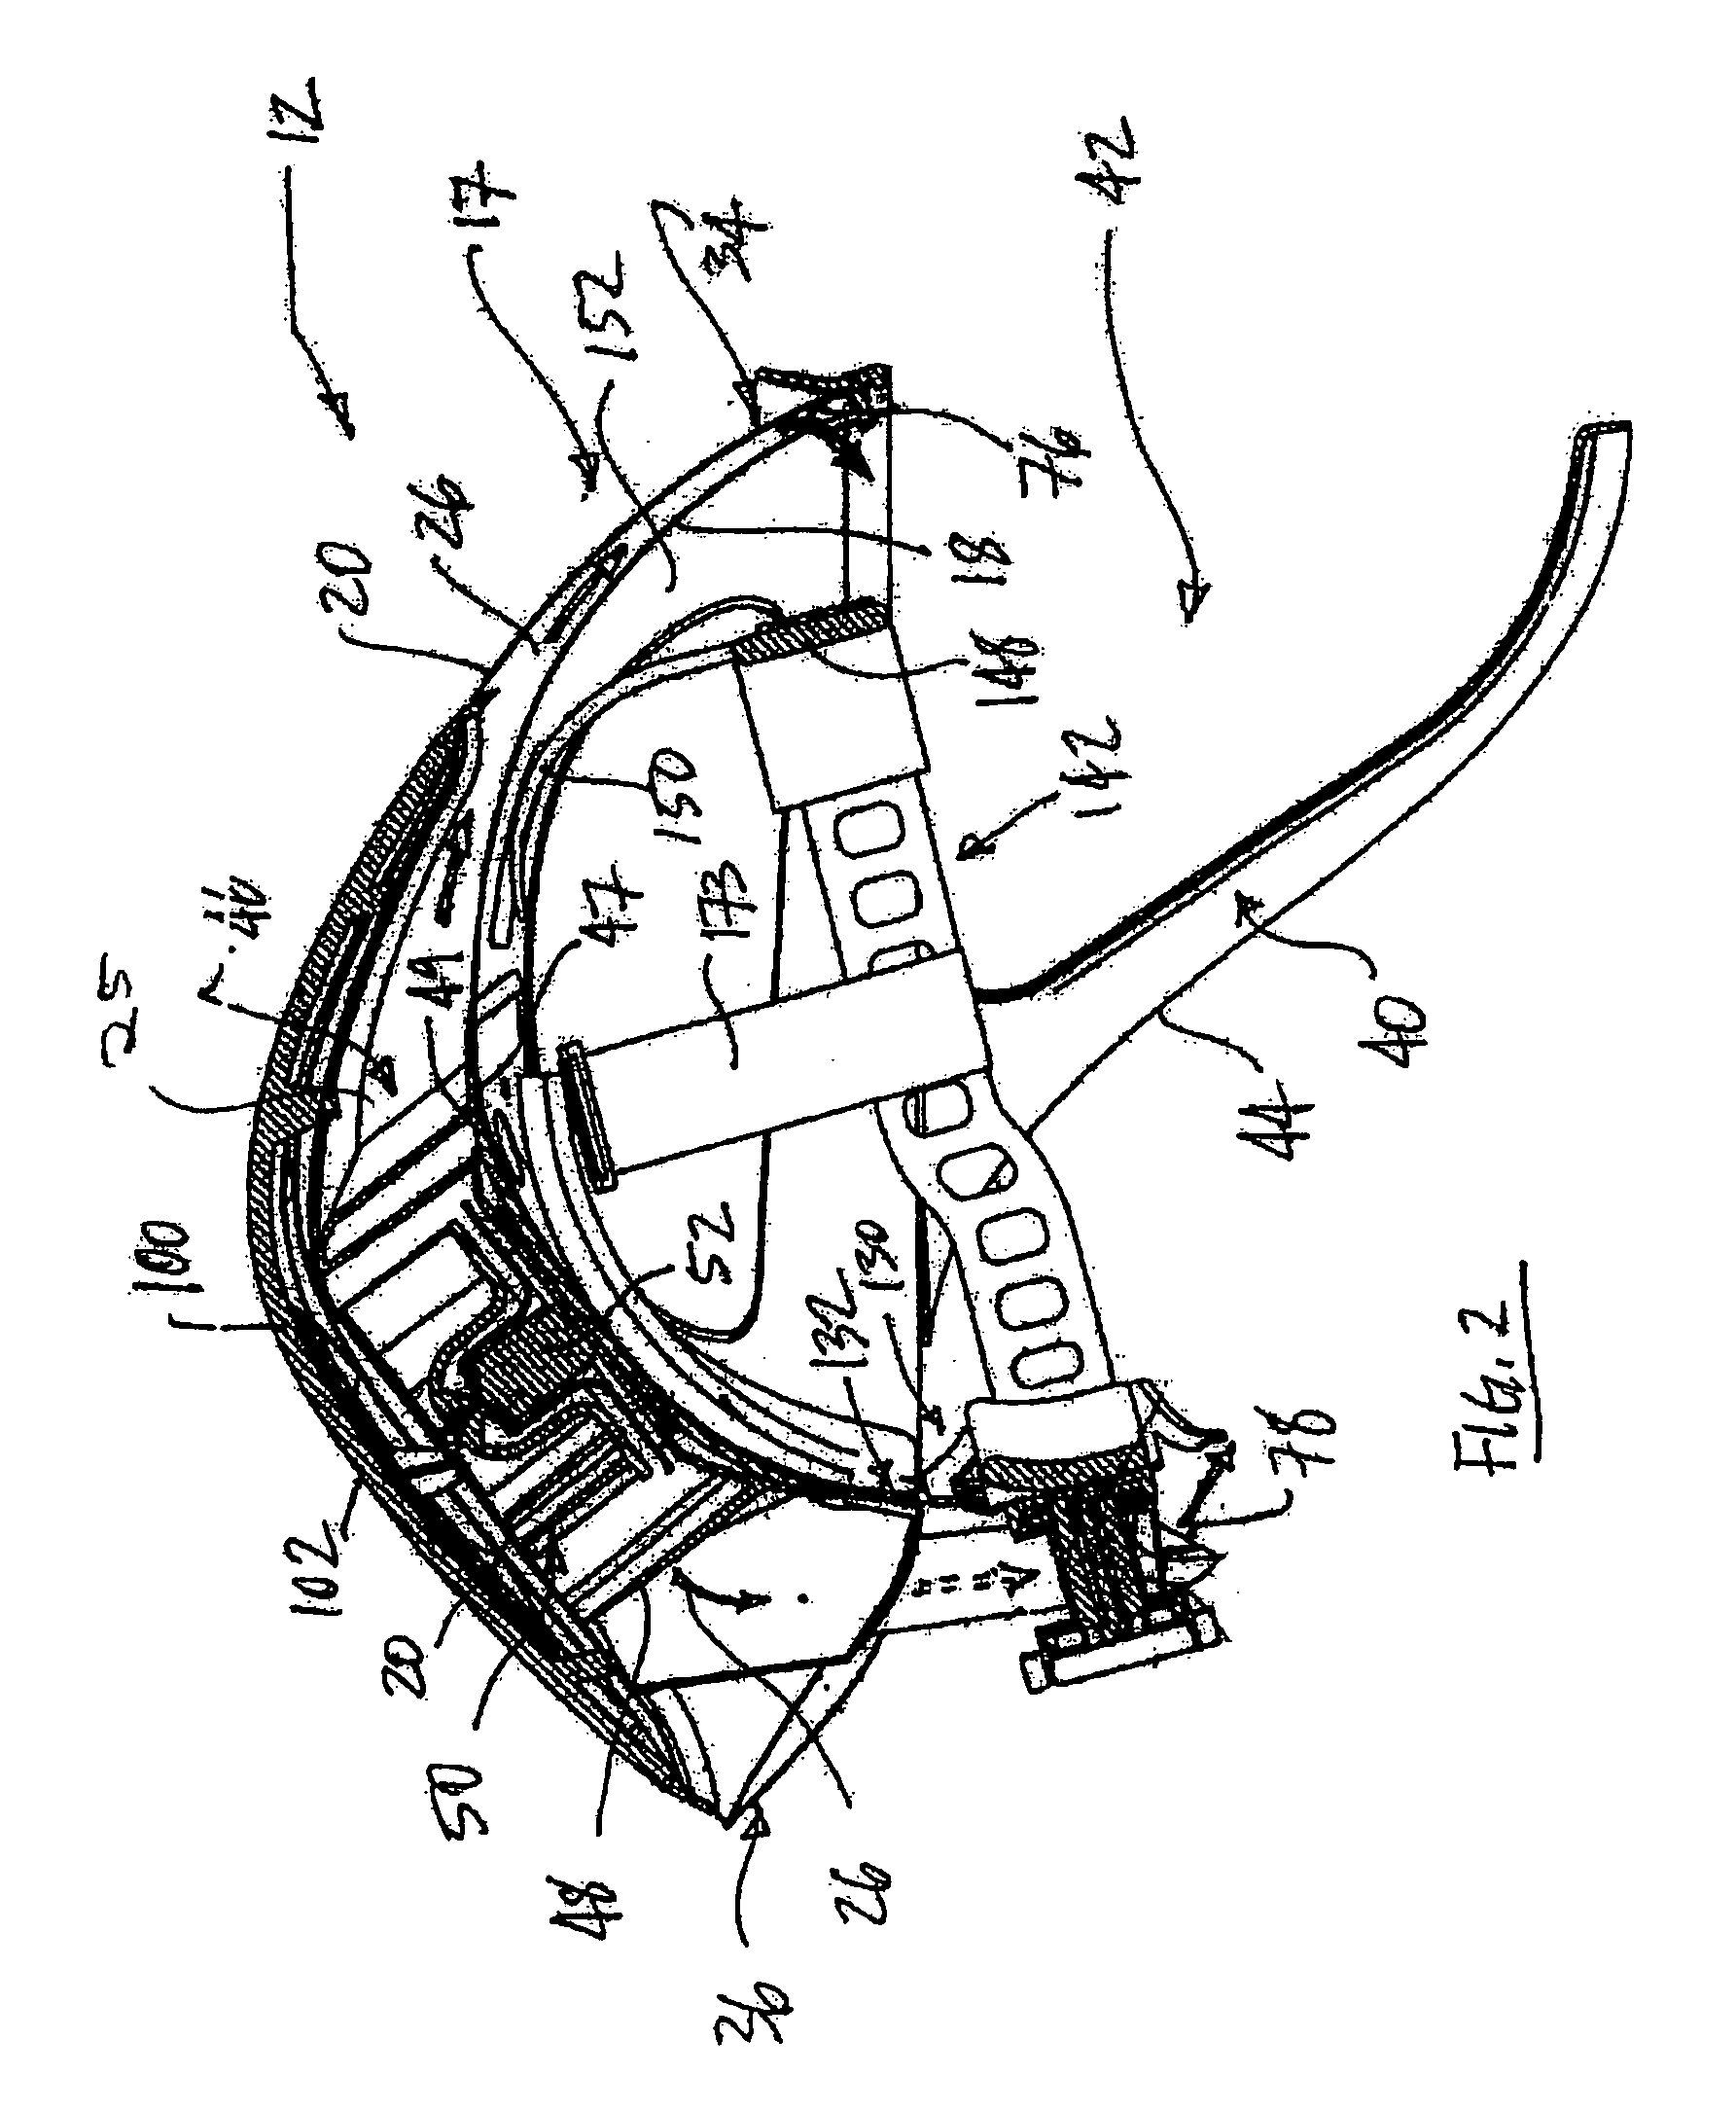 Head unit for a medical/surgical personal protection system with a head band and a ventilation unit that is adjustably position relative to the head band